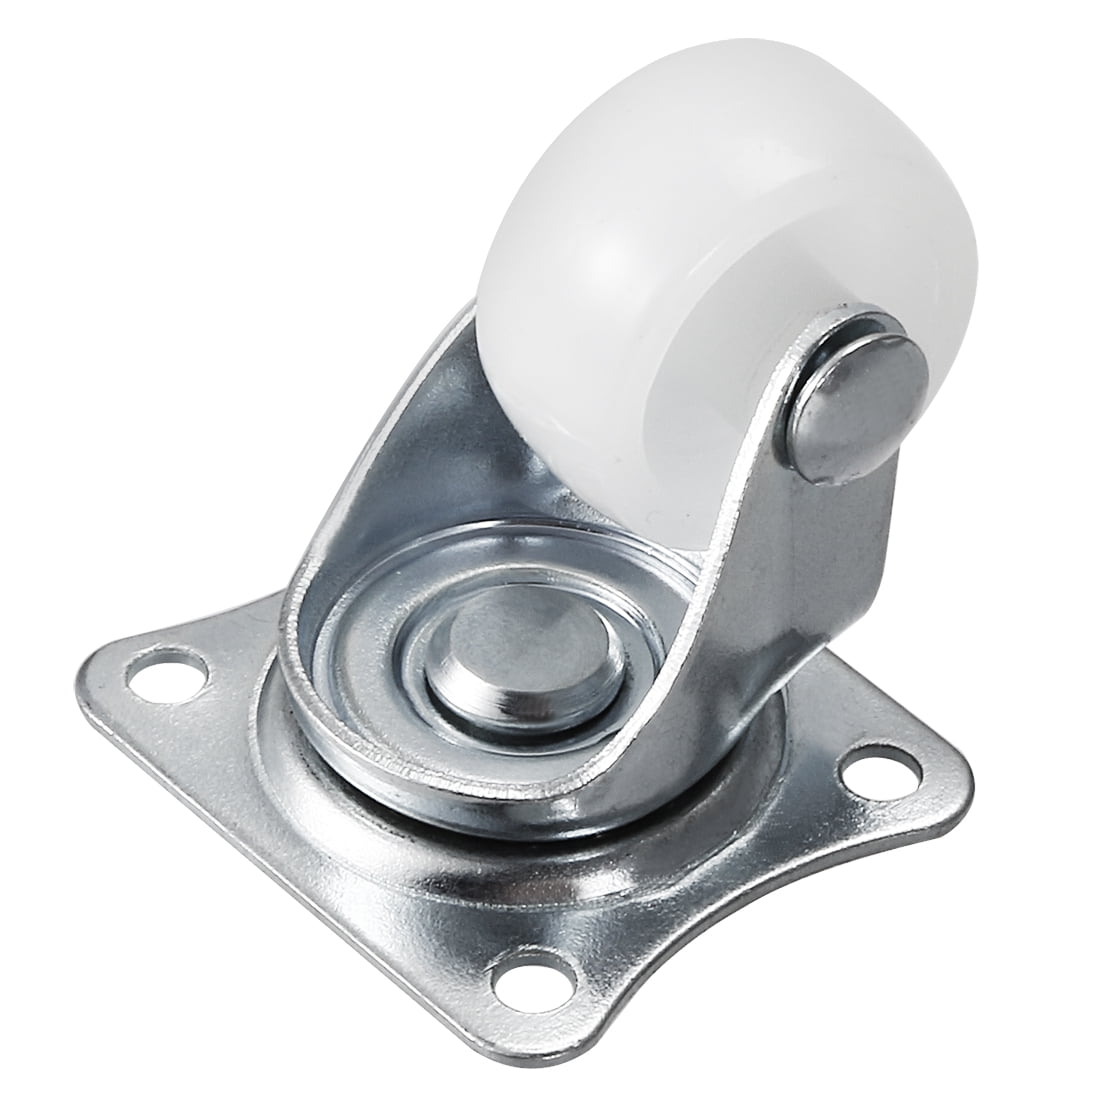 Details about   1 pc Durable Nylon-Metal All Swivel Caster Wheel Casters with Top Plate for 